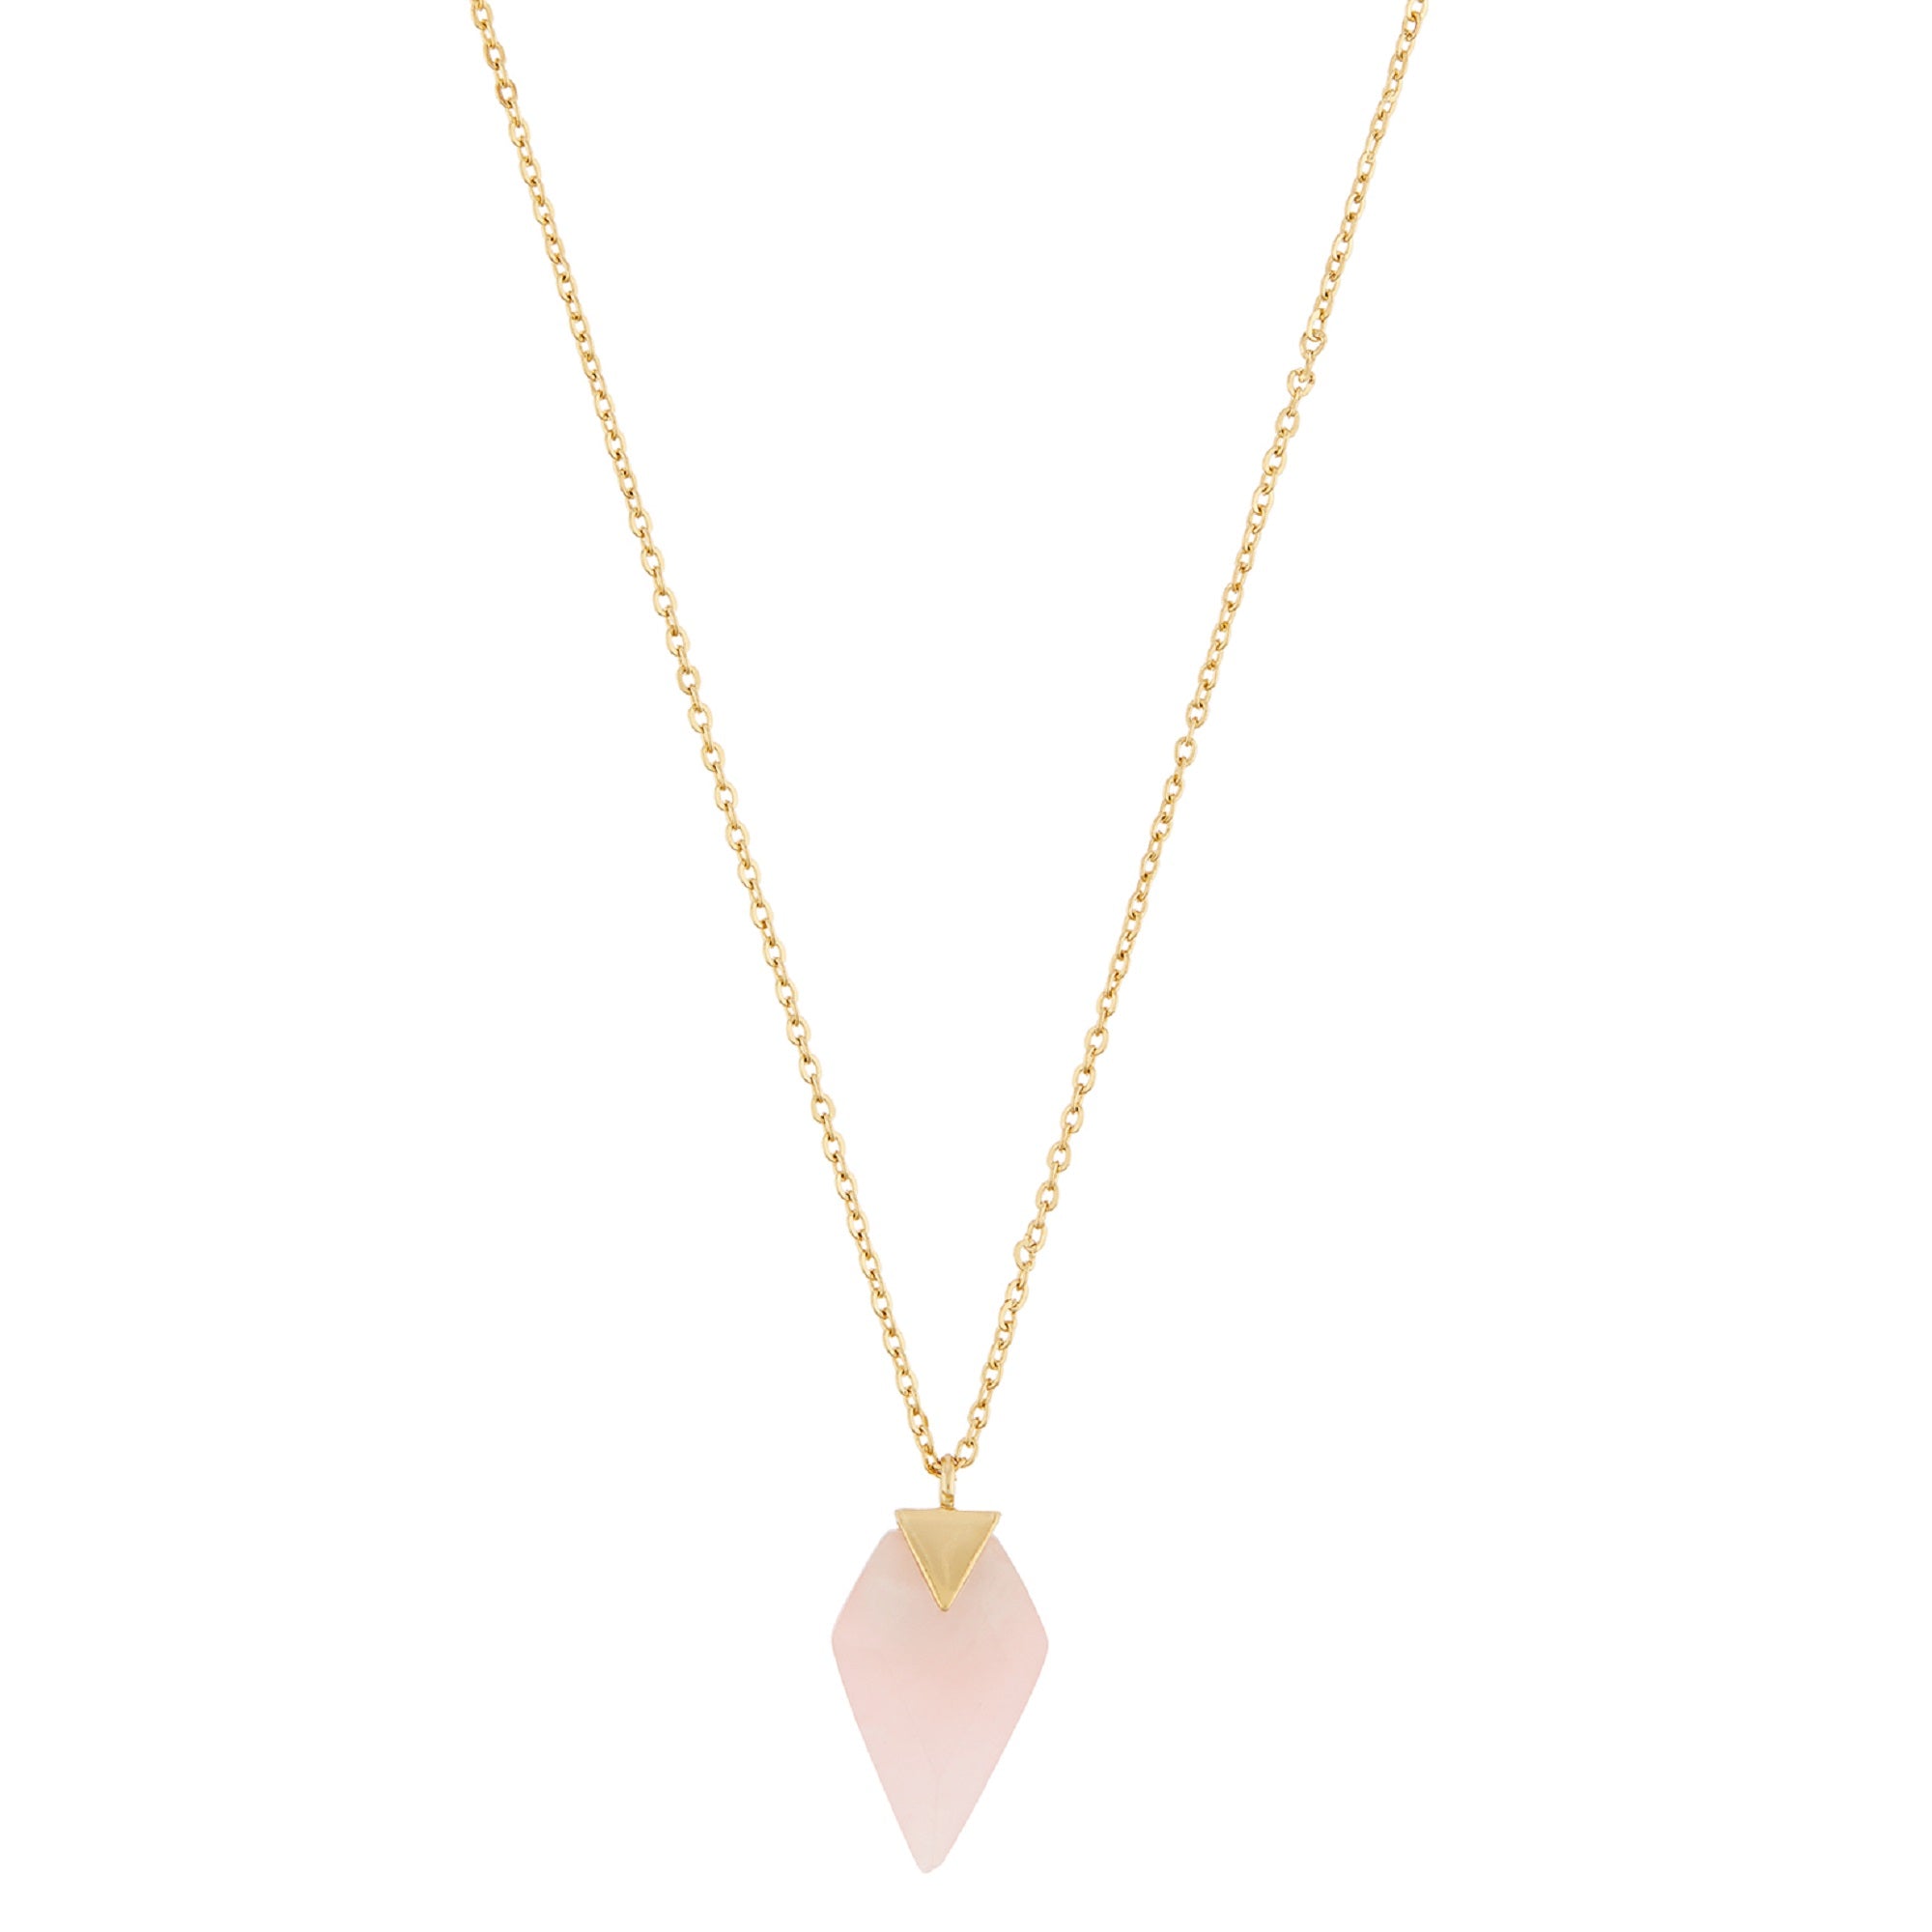 Real Gold Plated Rose Gold Healing Stones Necklace